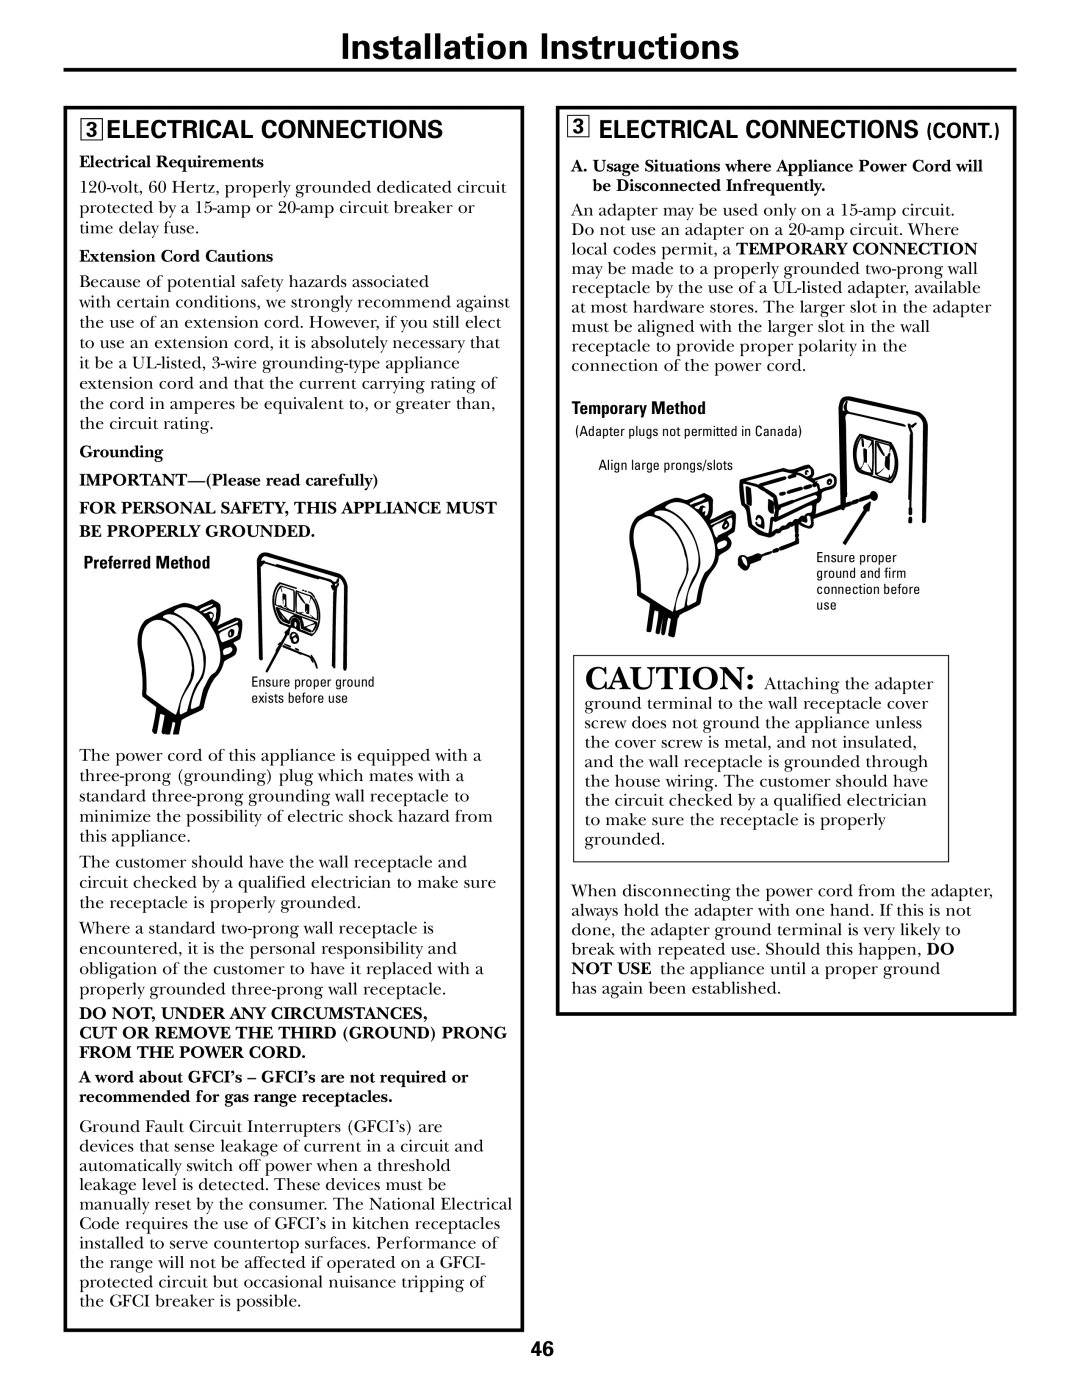 GE CGS980 Electrical Connections Cont, Installation Instructions, Preferred Method, Temporary Method 